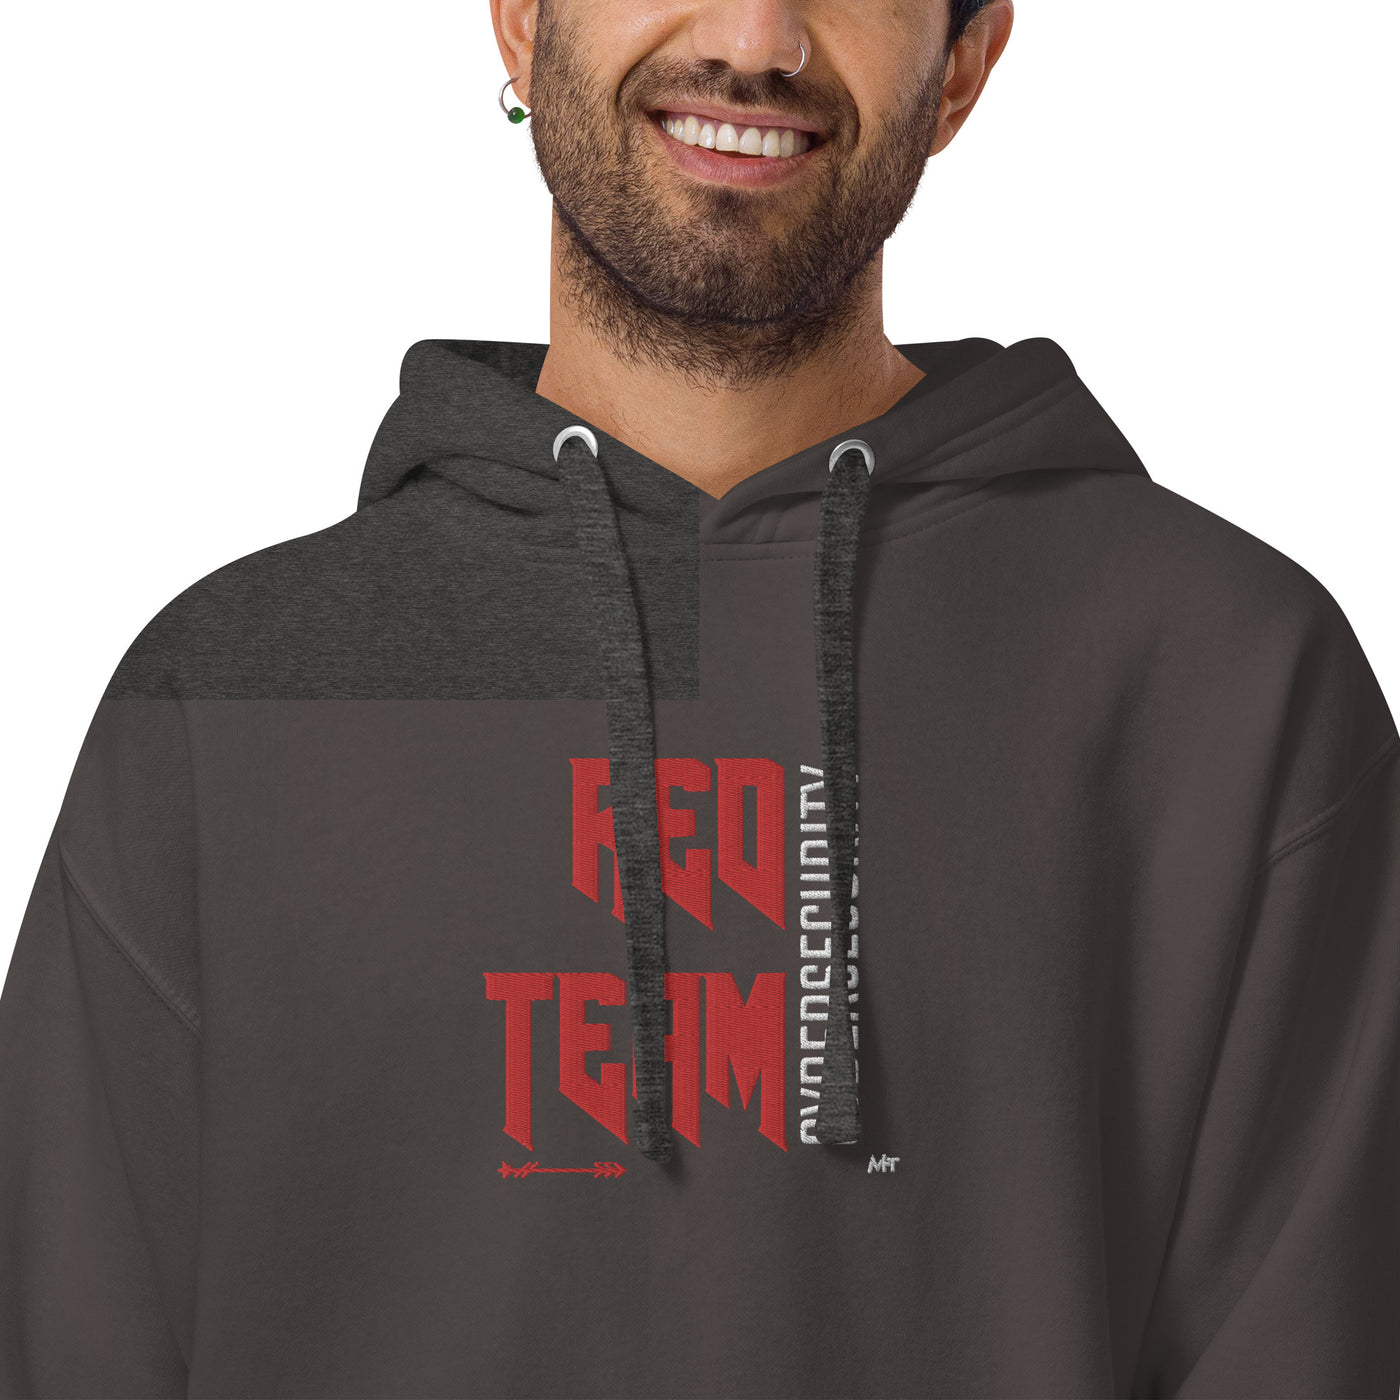 Cyber Security Red Team V9 - Unisex Hoodie Embroidered